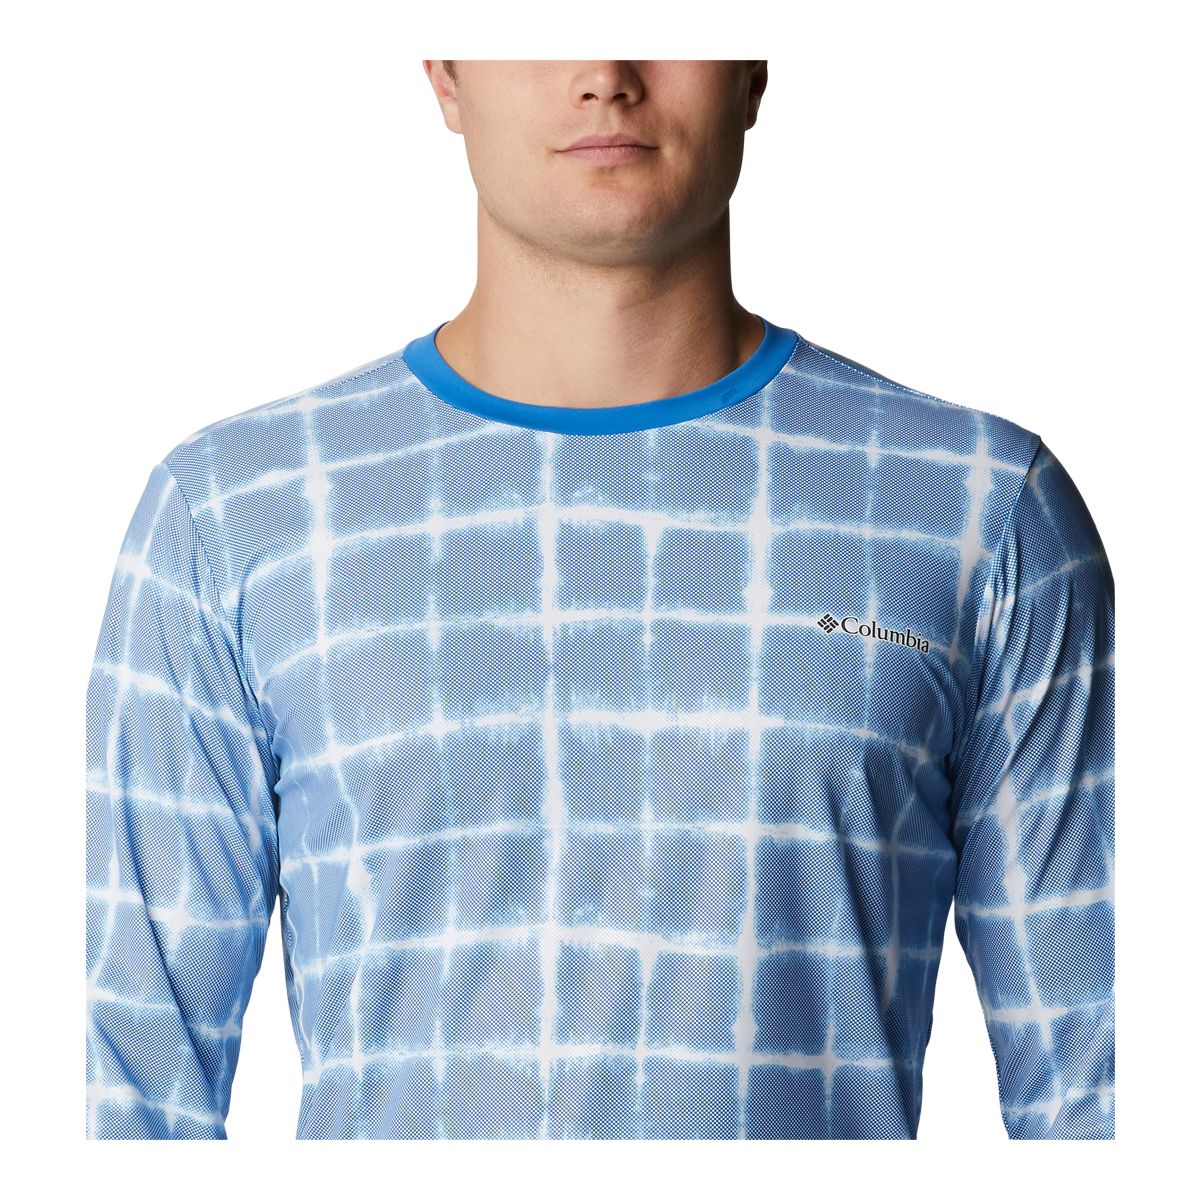 https://media-www.atmosphere.ca/product/div-03-softgoods/dpt-72-casual-clothing/sdpt-01-mens/333390151/columbia-m-sun-deflector-sd-l-indigo-t-d-f-s--8994b087-dcd5-47e7-ad45-c3ce5a60ec24-jpgrendition.jpg?imdensity=1&imwidth=1244&impolicy=mZoom